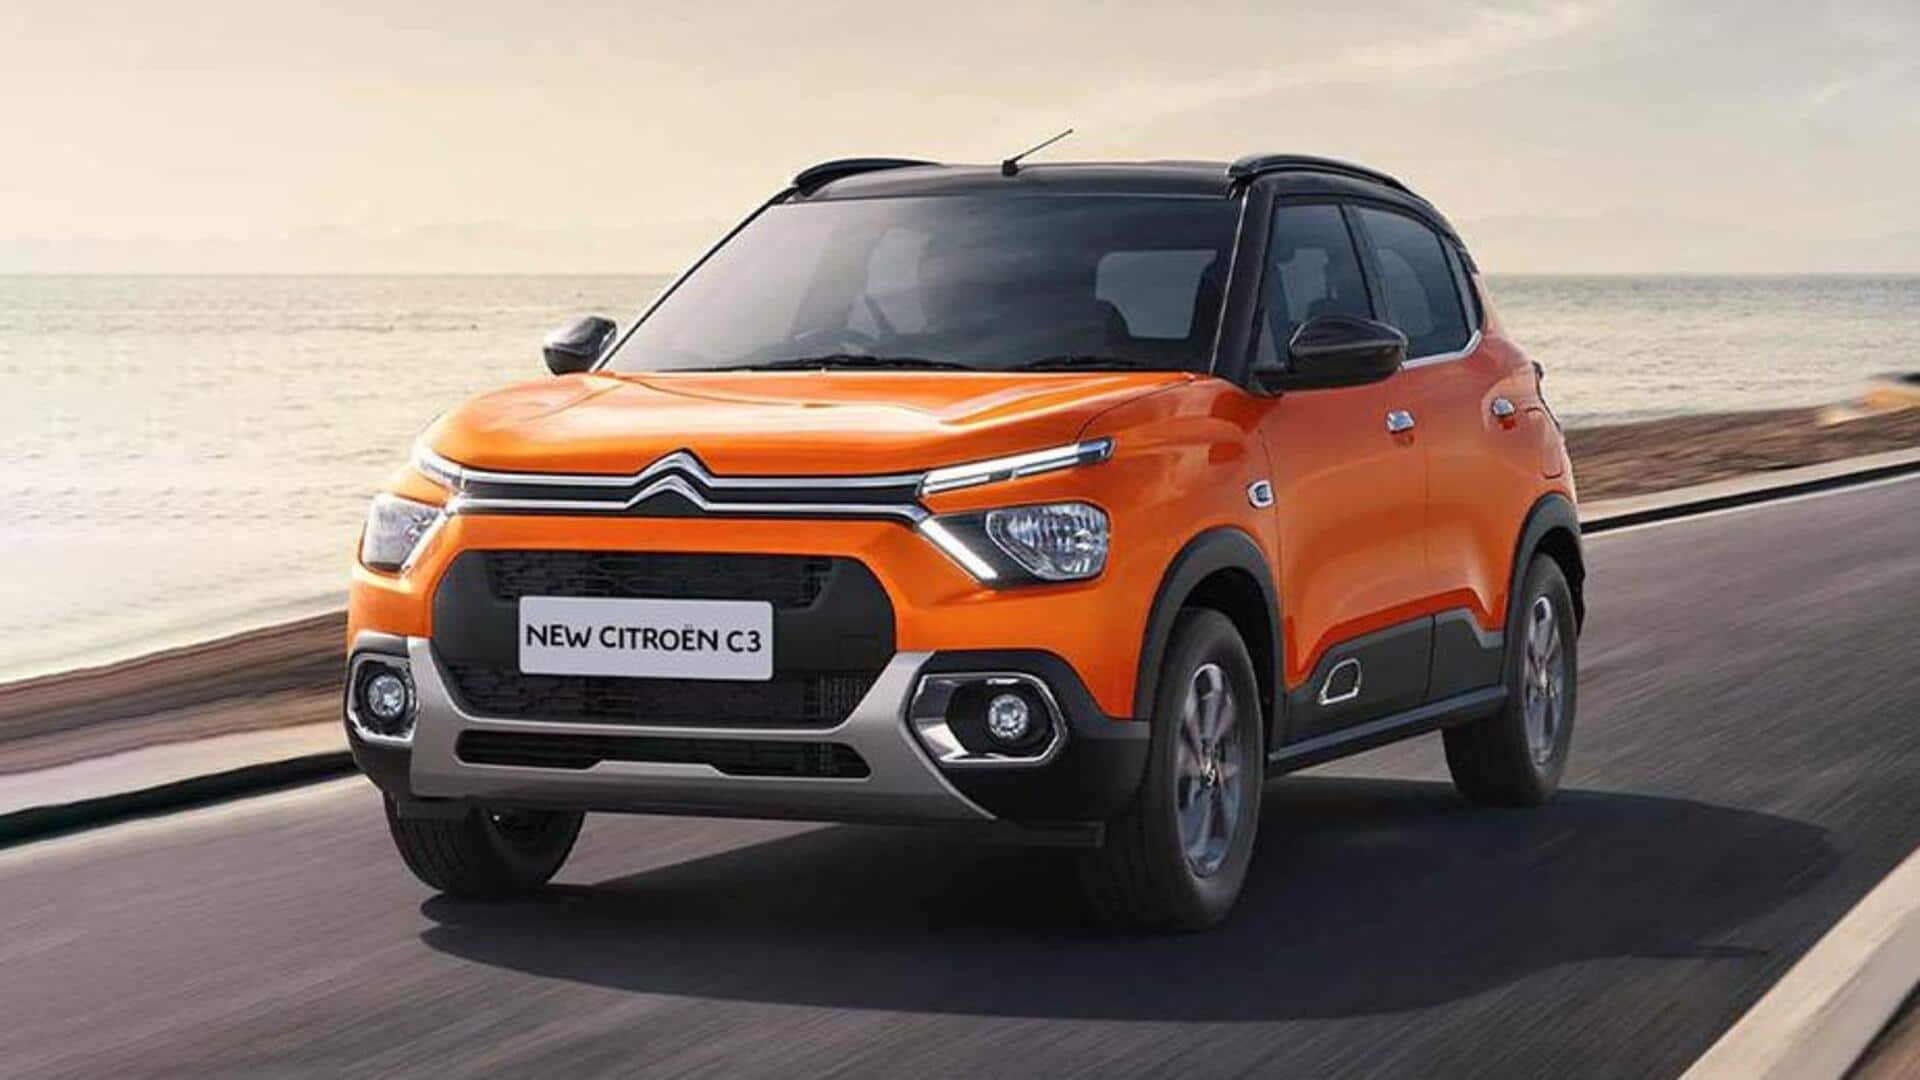 Citroen C3X crossover undergoing testing in India: What to expect